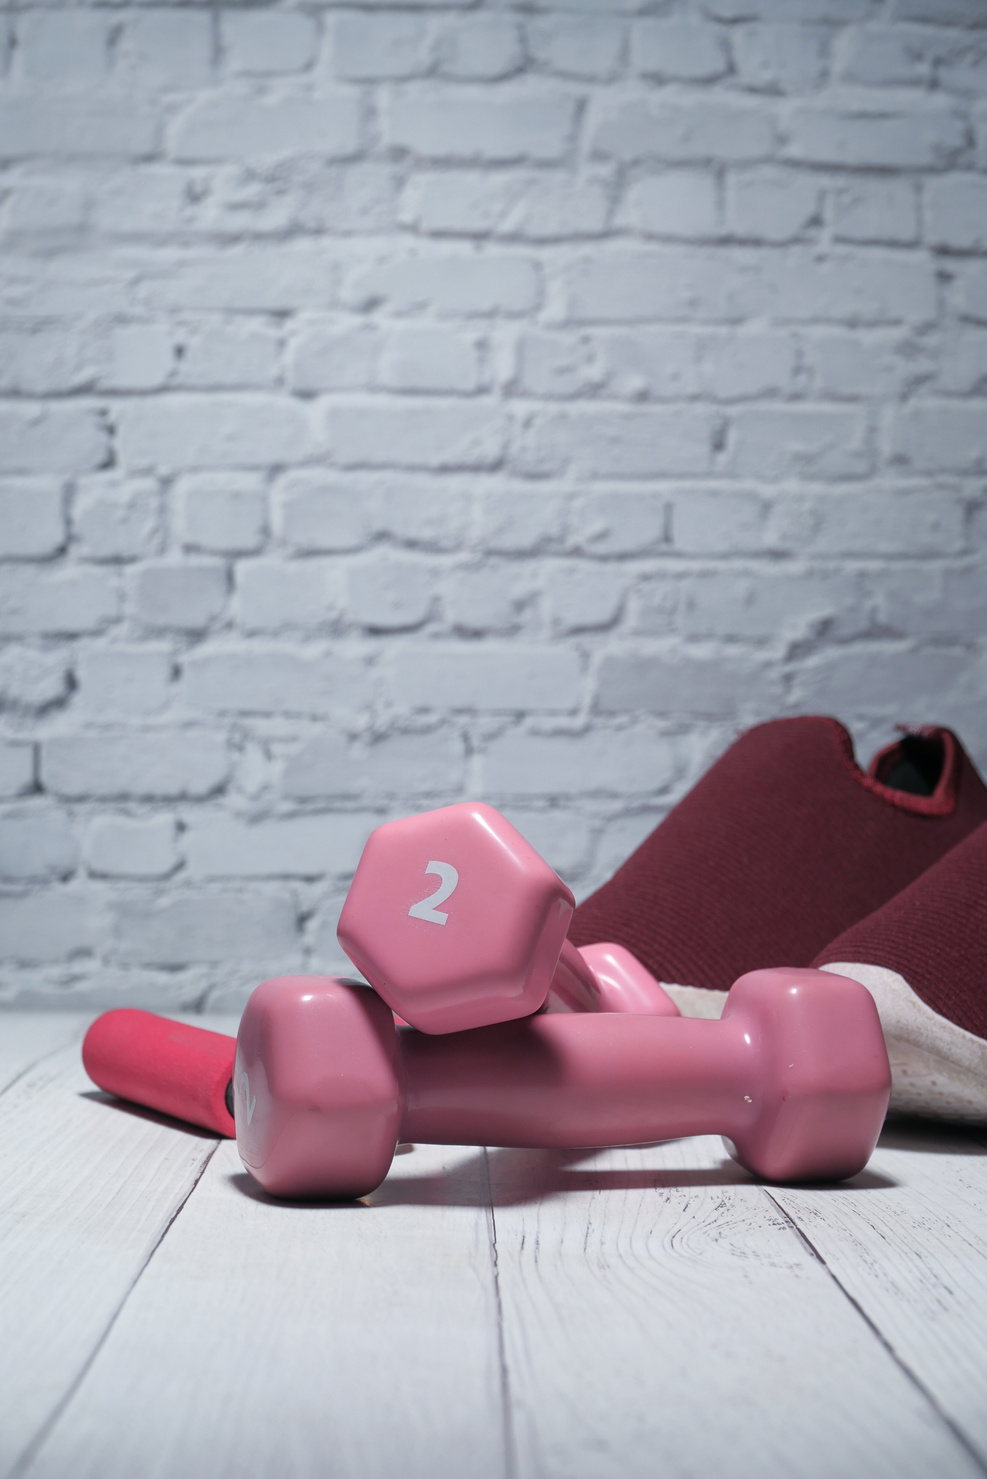 Dumbbells, Shoe and Exercise Mat on Floor against Brick Wall